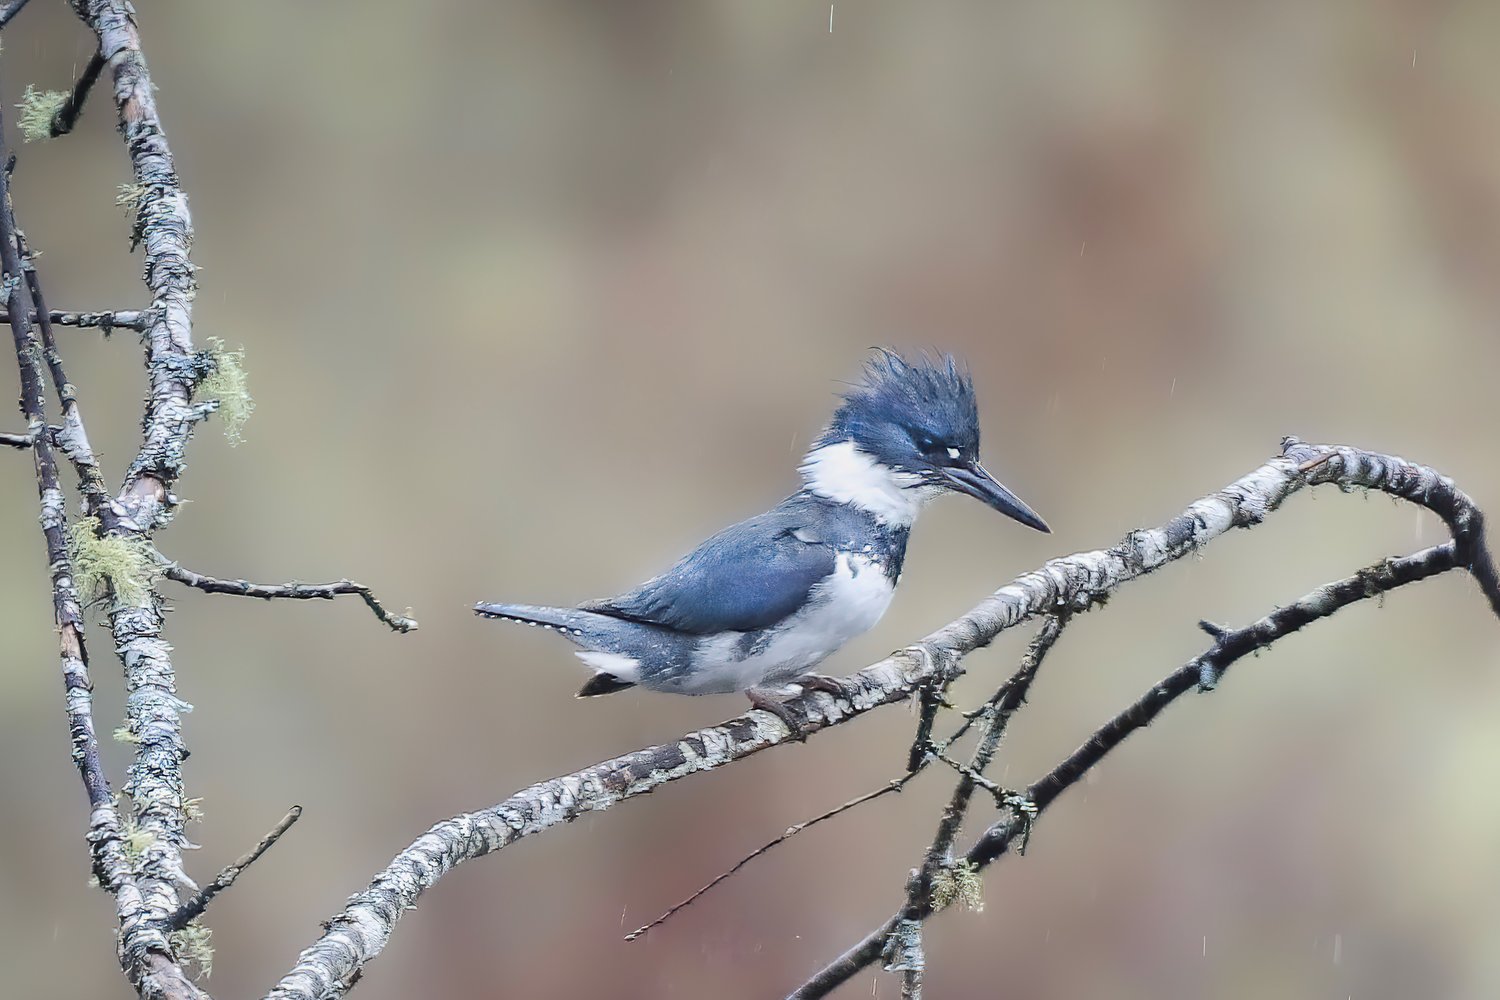 This is the Belted Kingfisher.